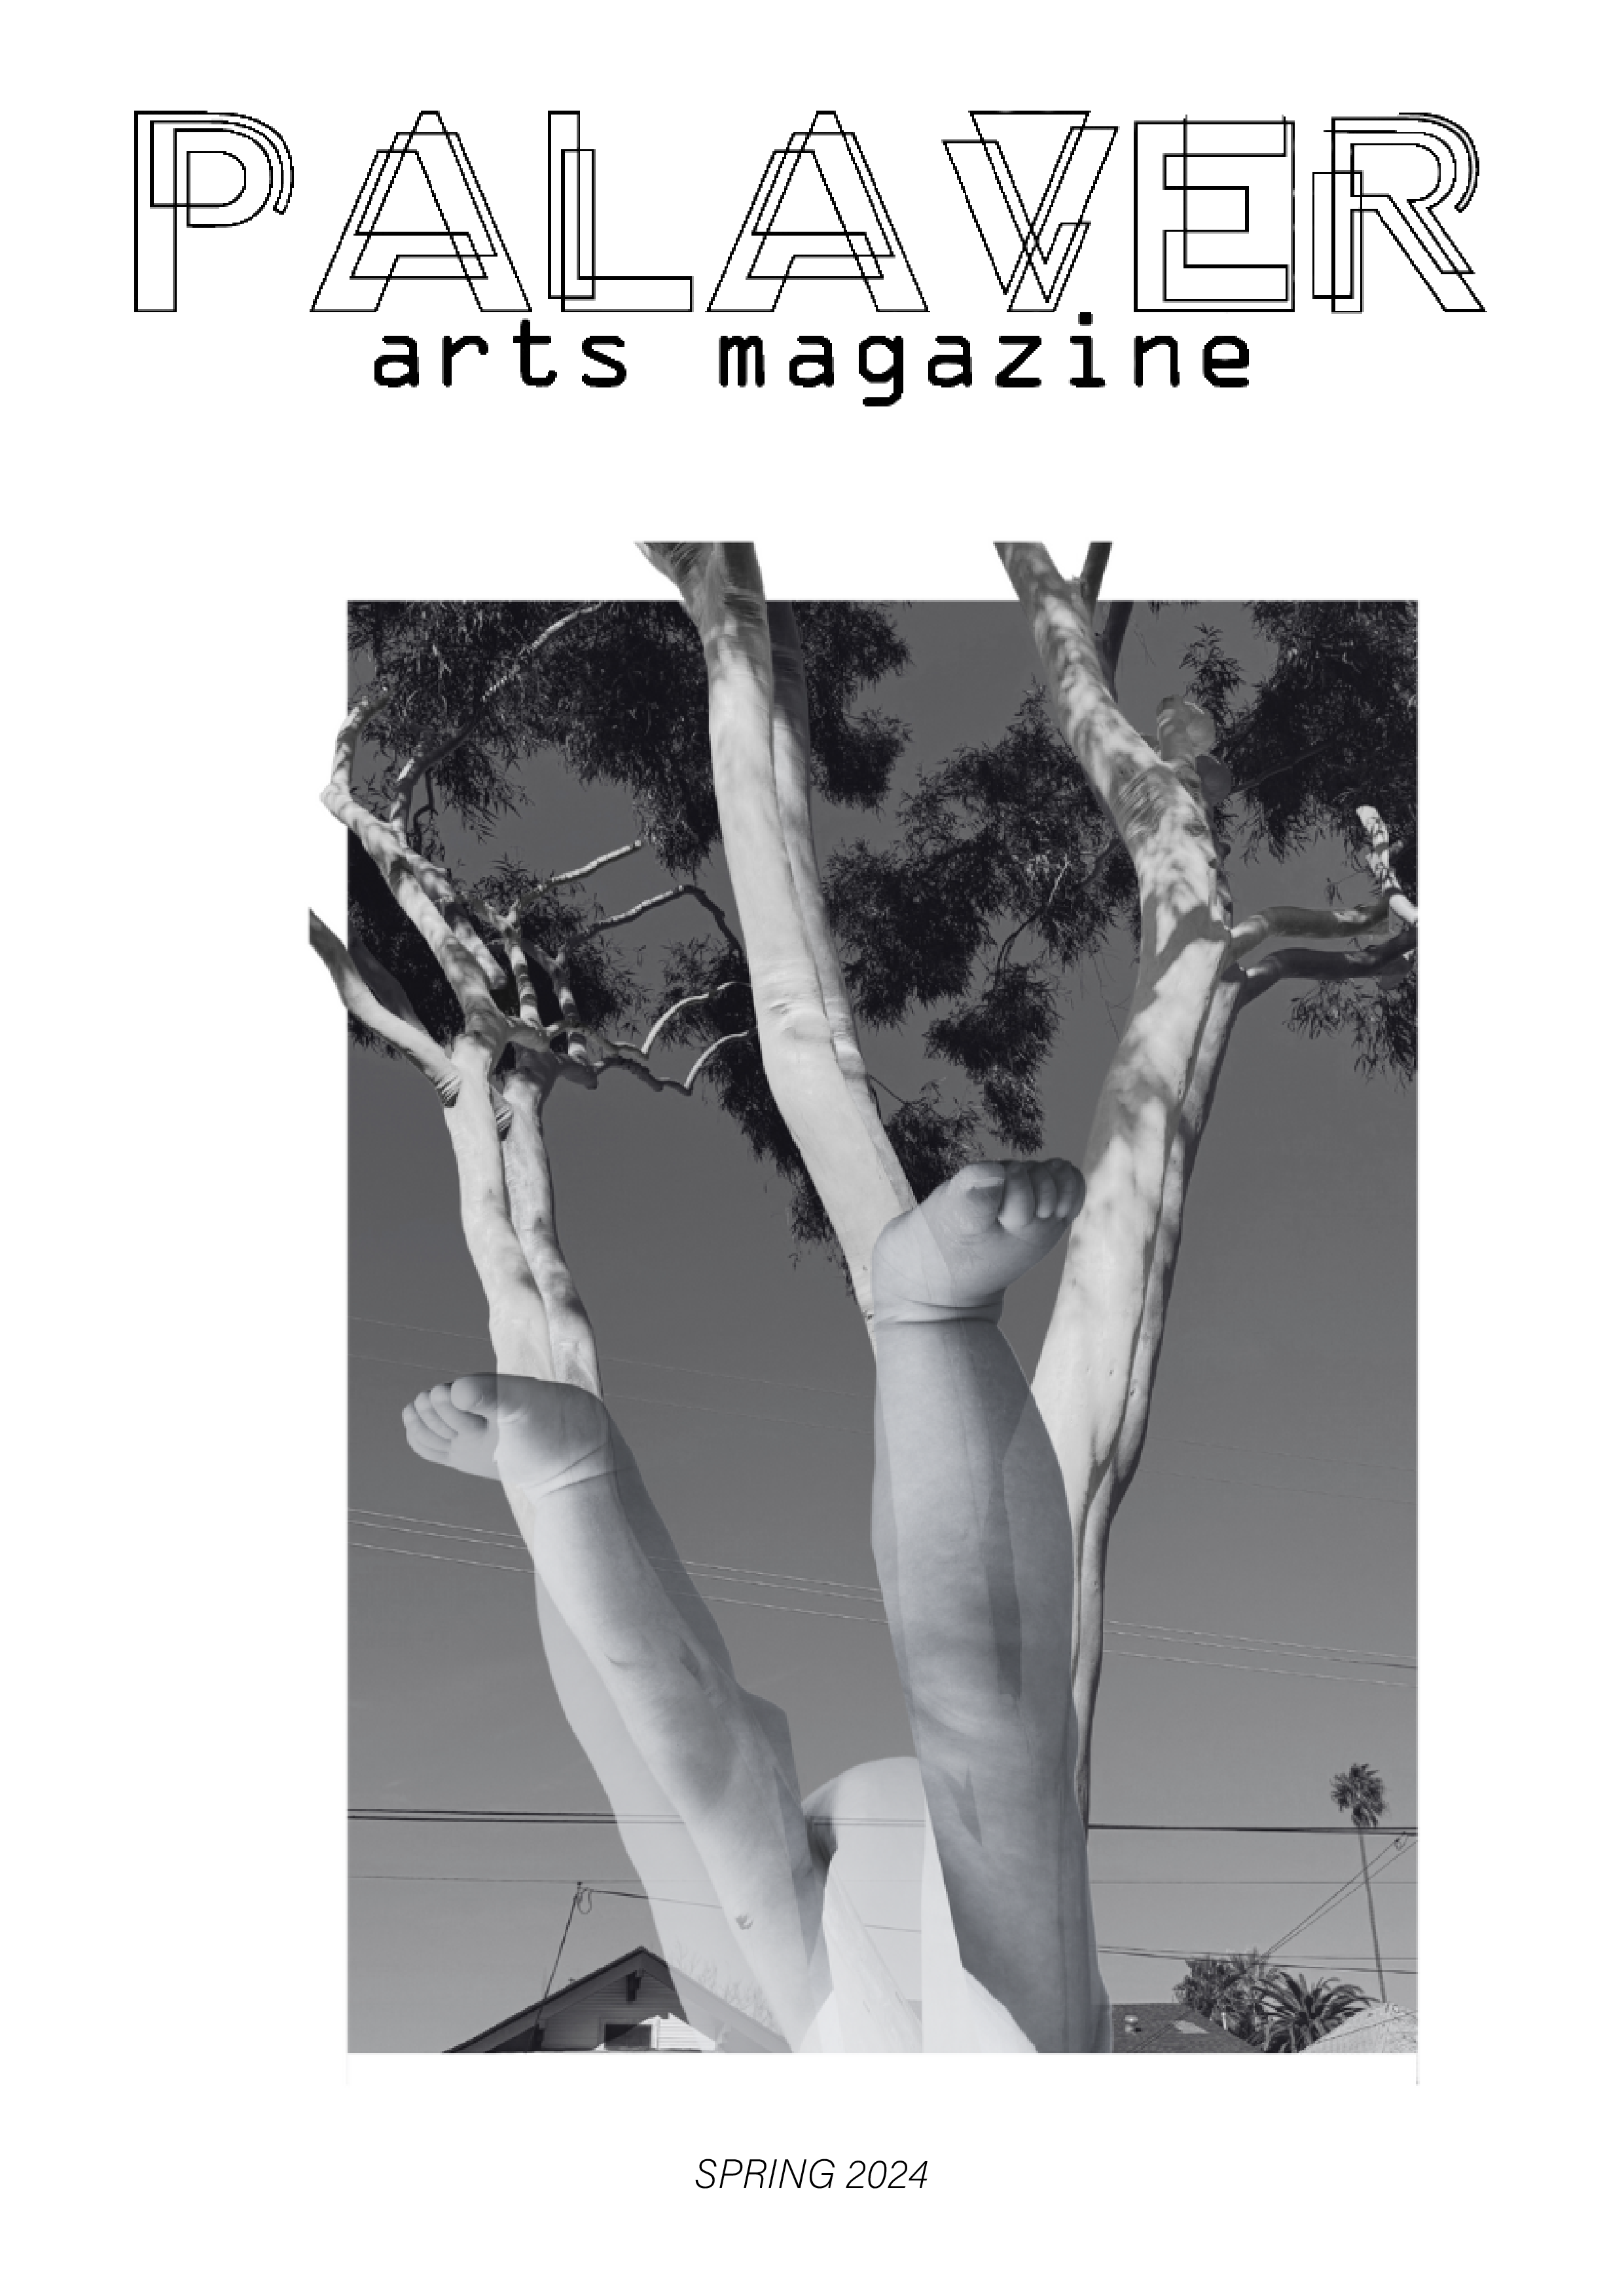 Palaver Arts Magazine Spring 2024 cover with a tree and human legs reaching upward in a black and white photograph